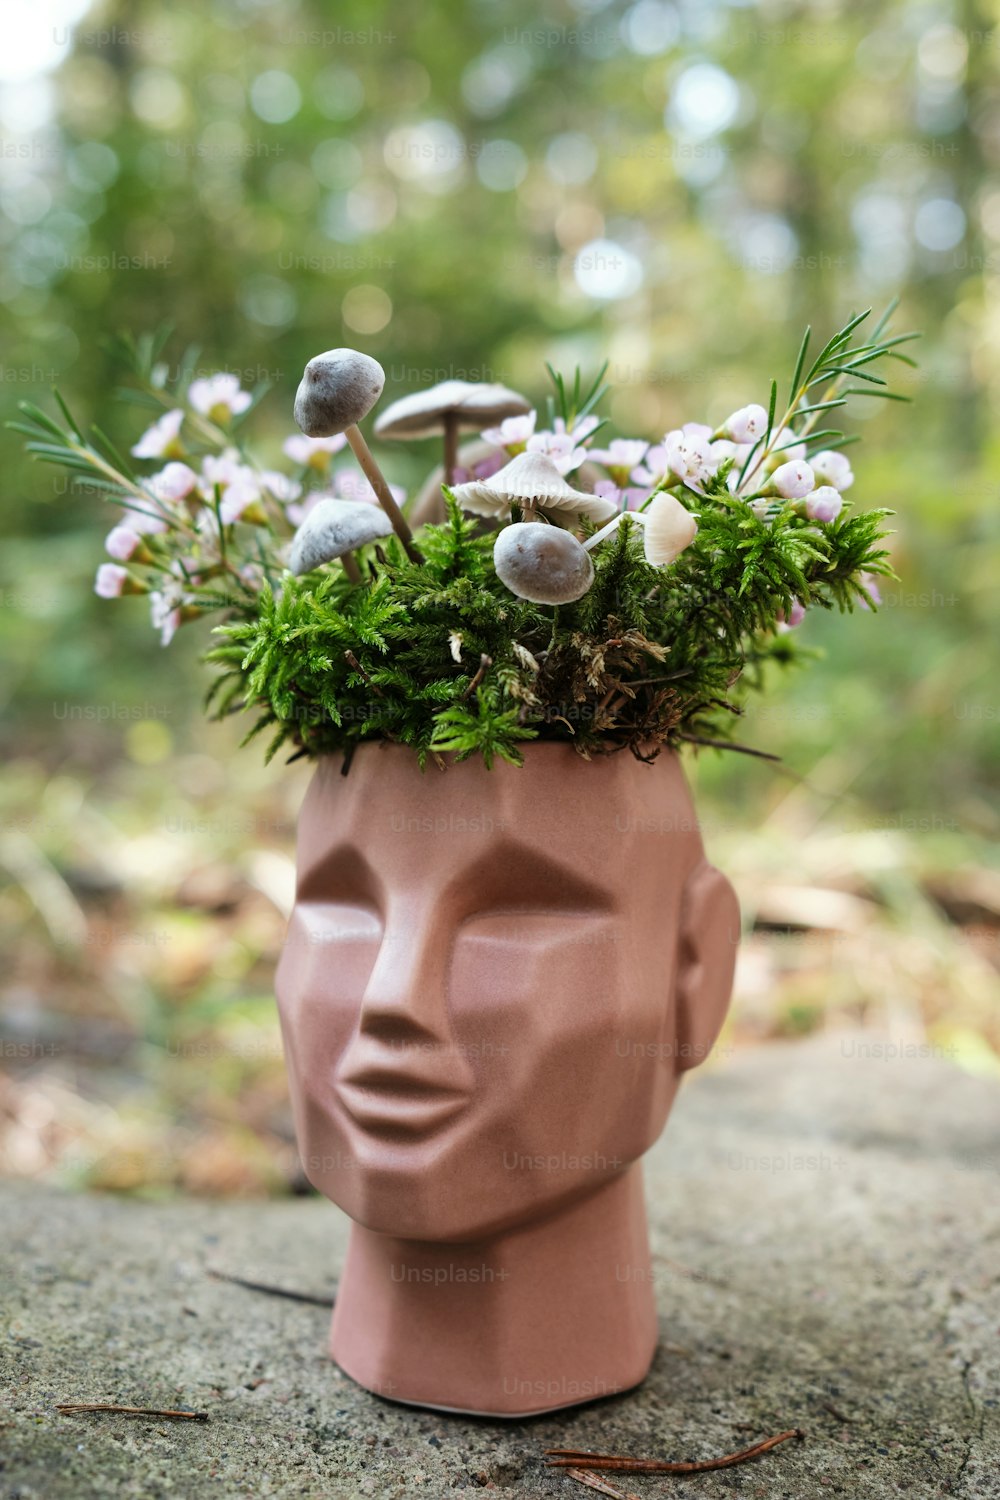 a clay head with a planter on top of it